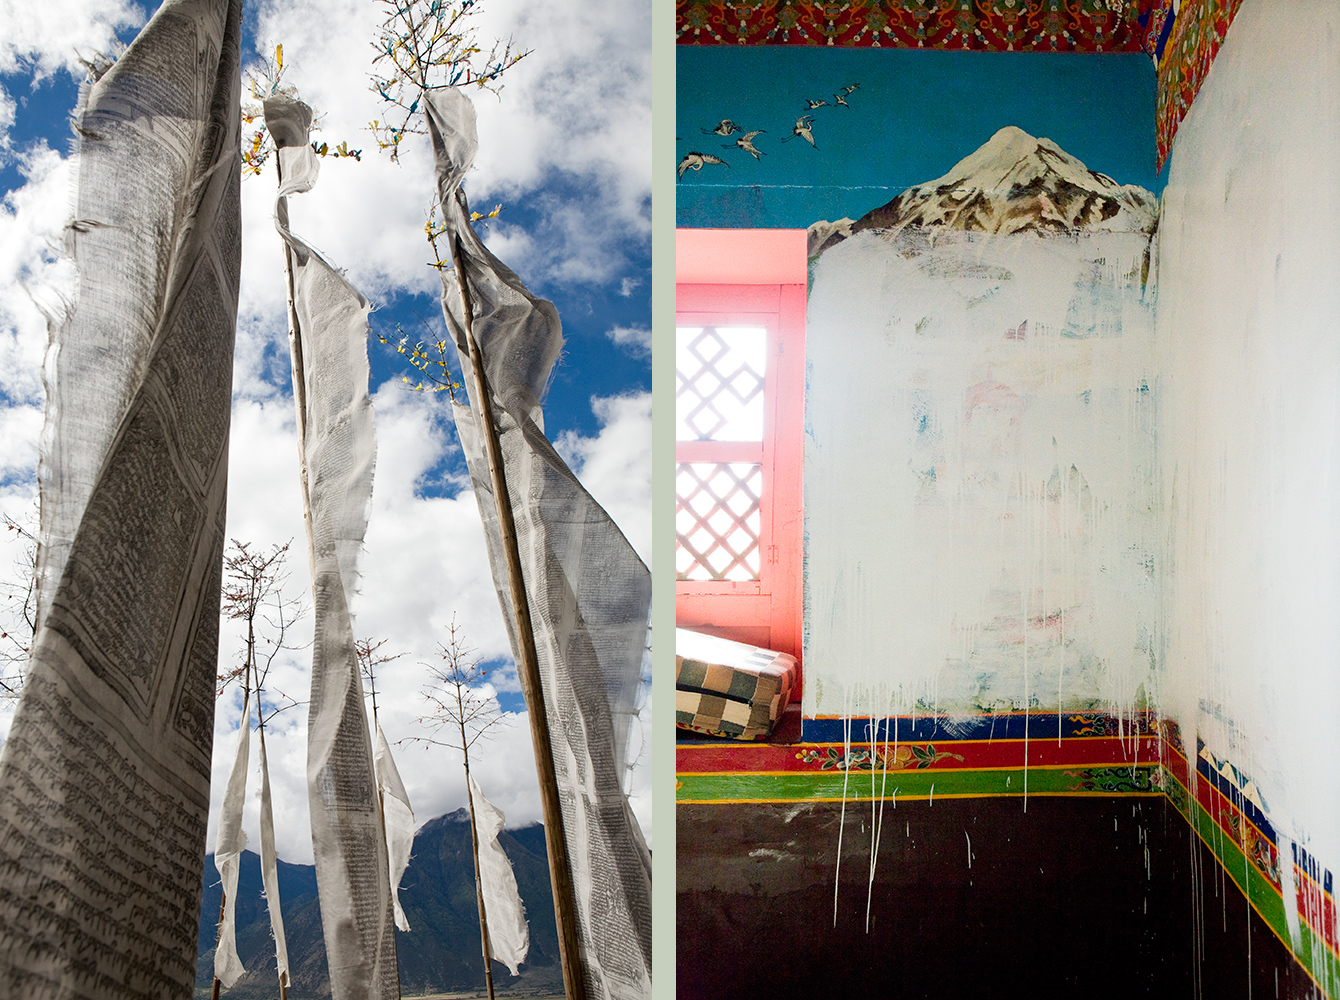  In the town of Nyingtri, Bön prayer flags whip in the wind, left.   A few miles away, a Bön monastery's walls were painted over by the Chinese authorities. It was believed the murals were destroyed because the government does not officially condone 